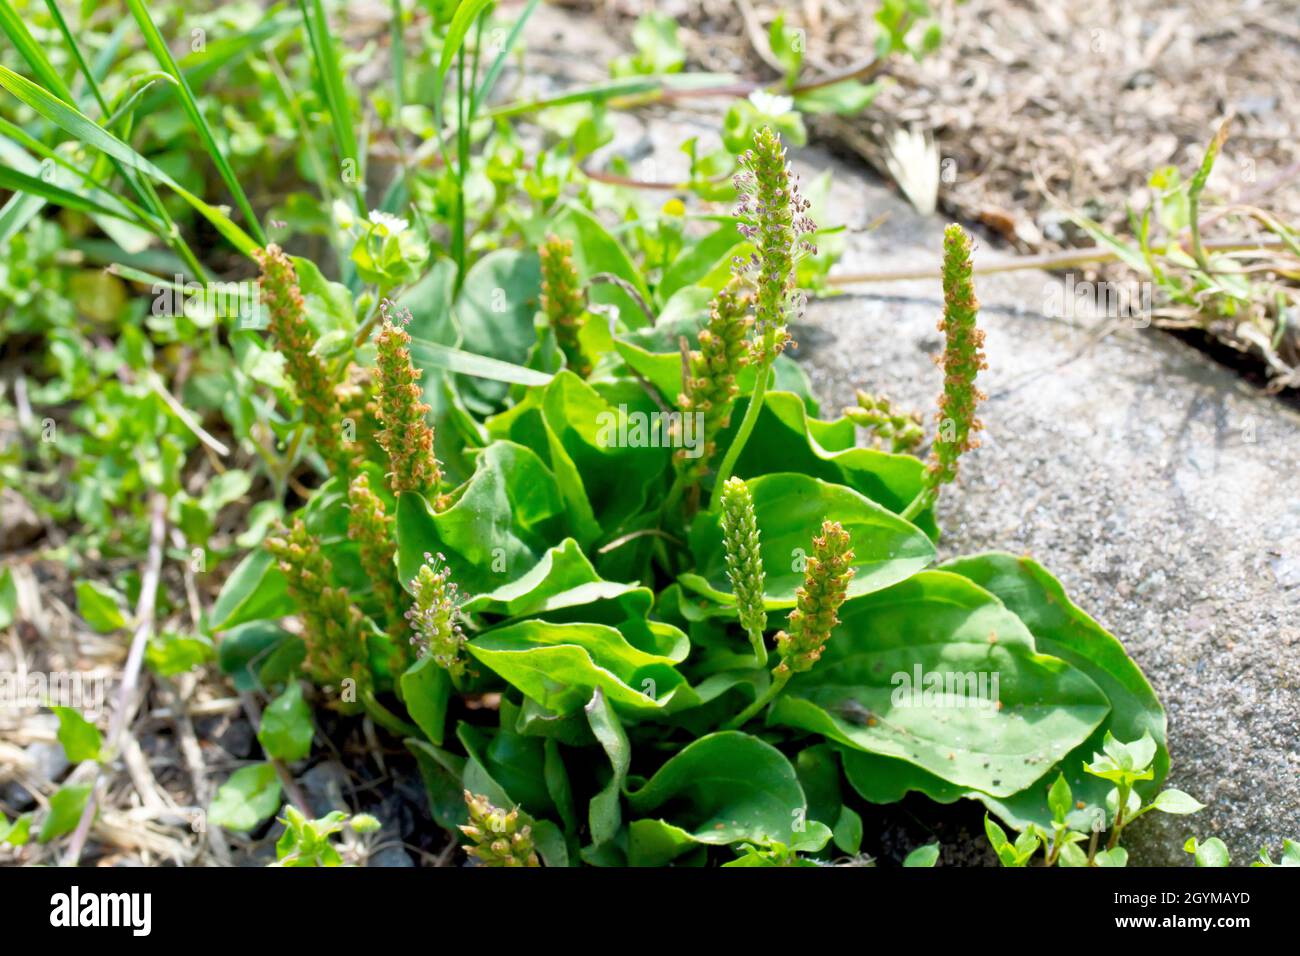 Greater Plantain or Rat's Tail (plantago major), close up showing the plant growing at the edge of a rough path. Stock Photo